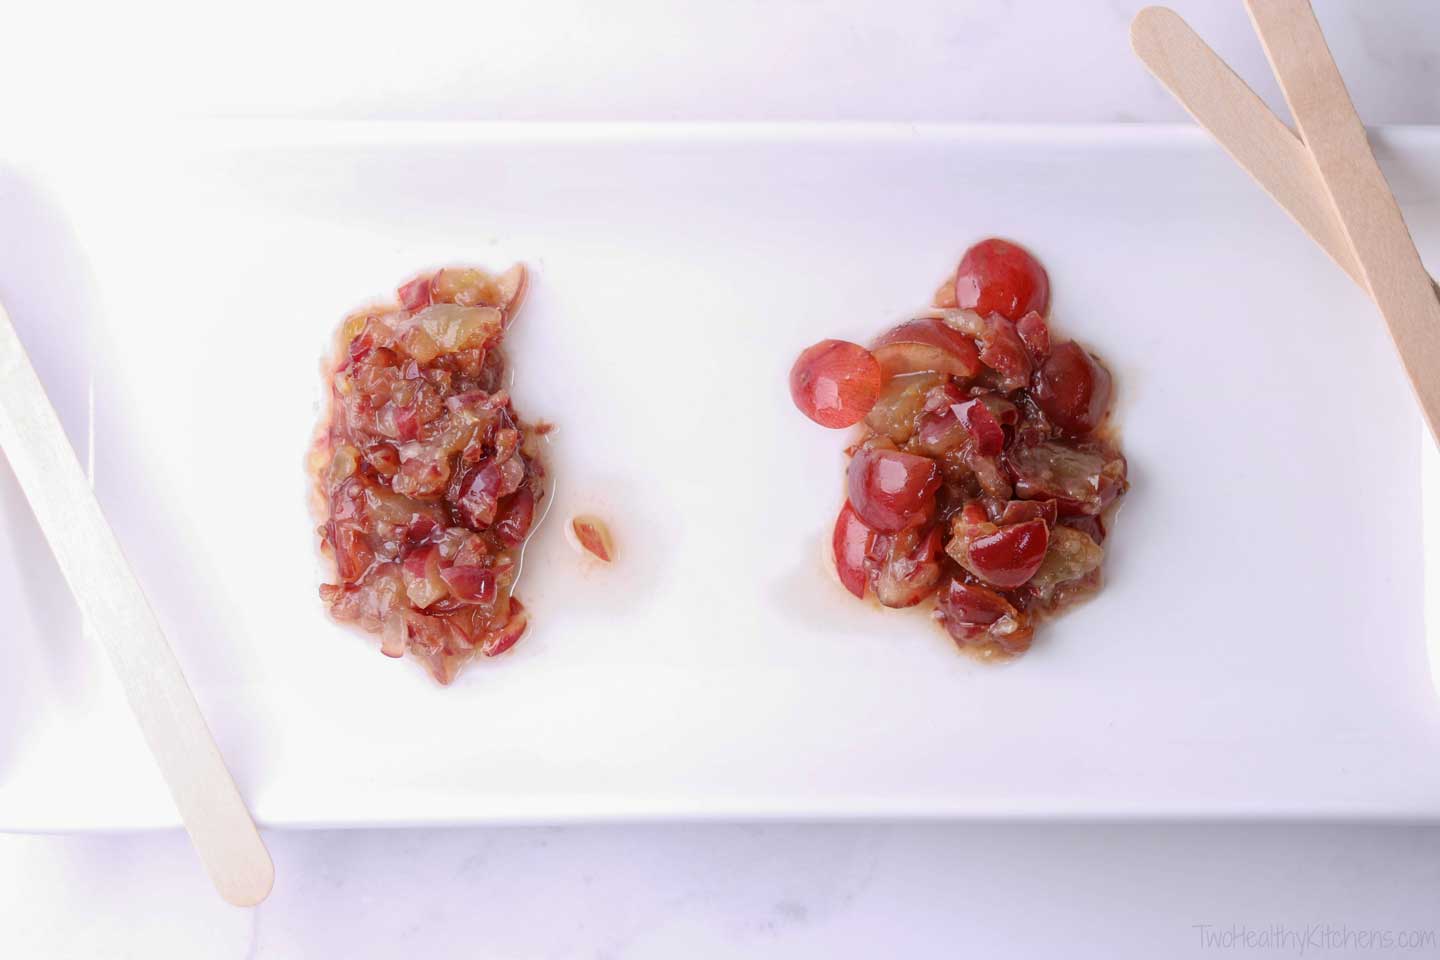 Rectangular white platter with two blobs of pureed red grapes - the right one more chunky - to show optional textures.